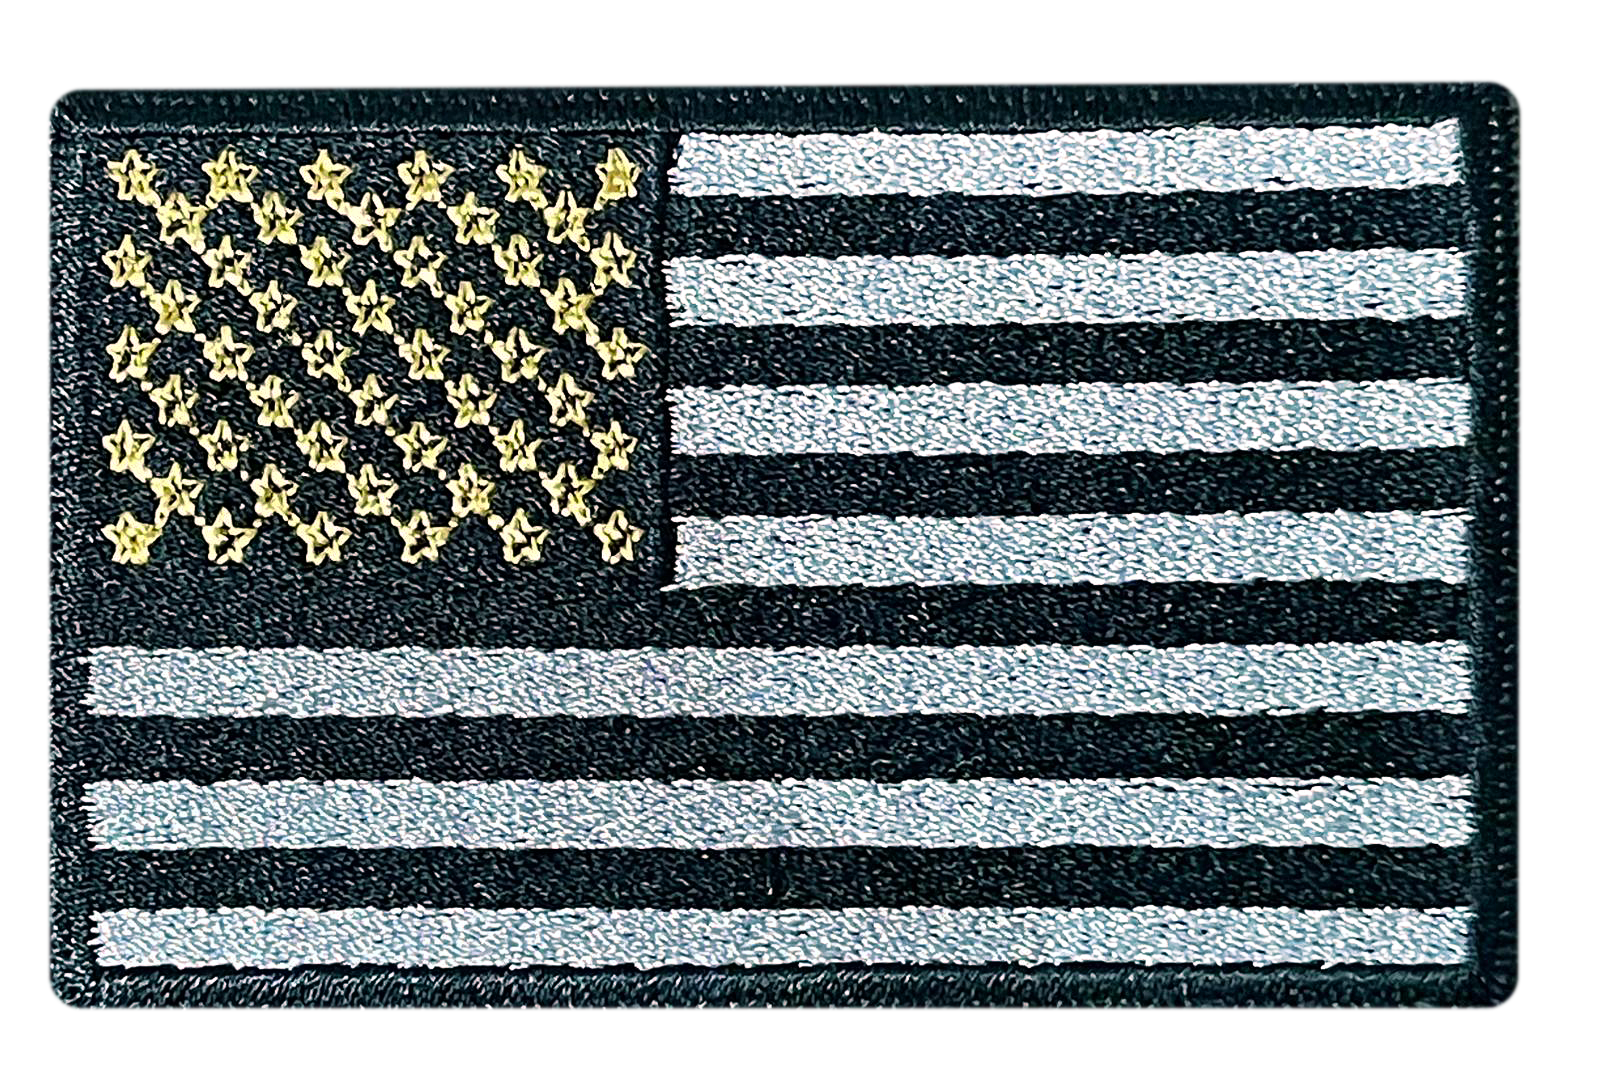 A black and silver american flag with gold stars on a white background.